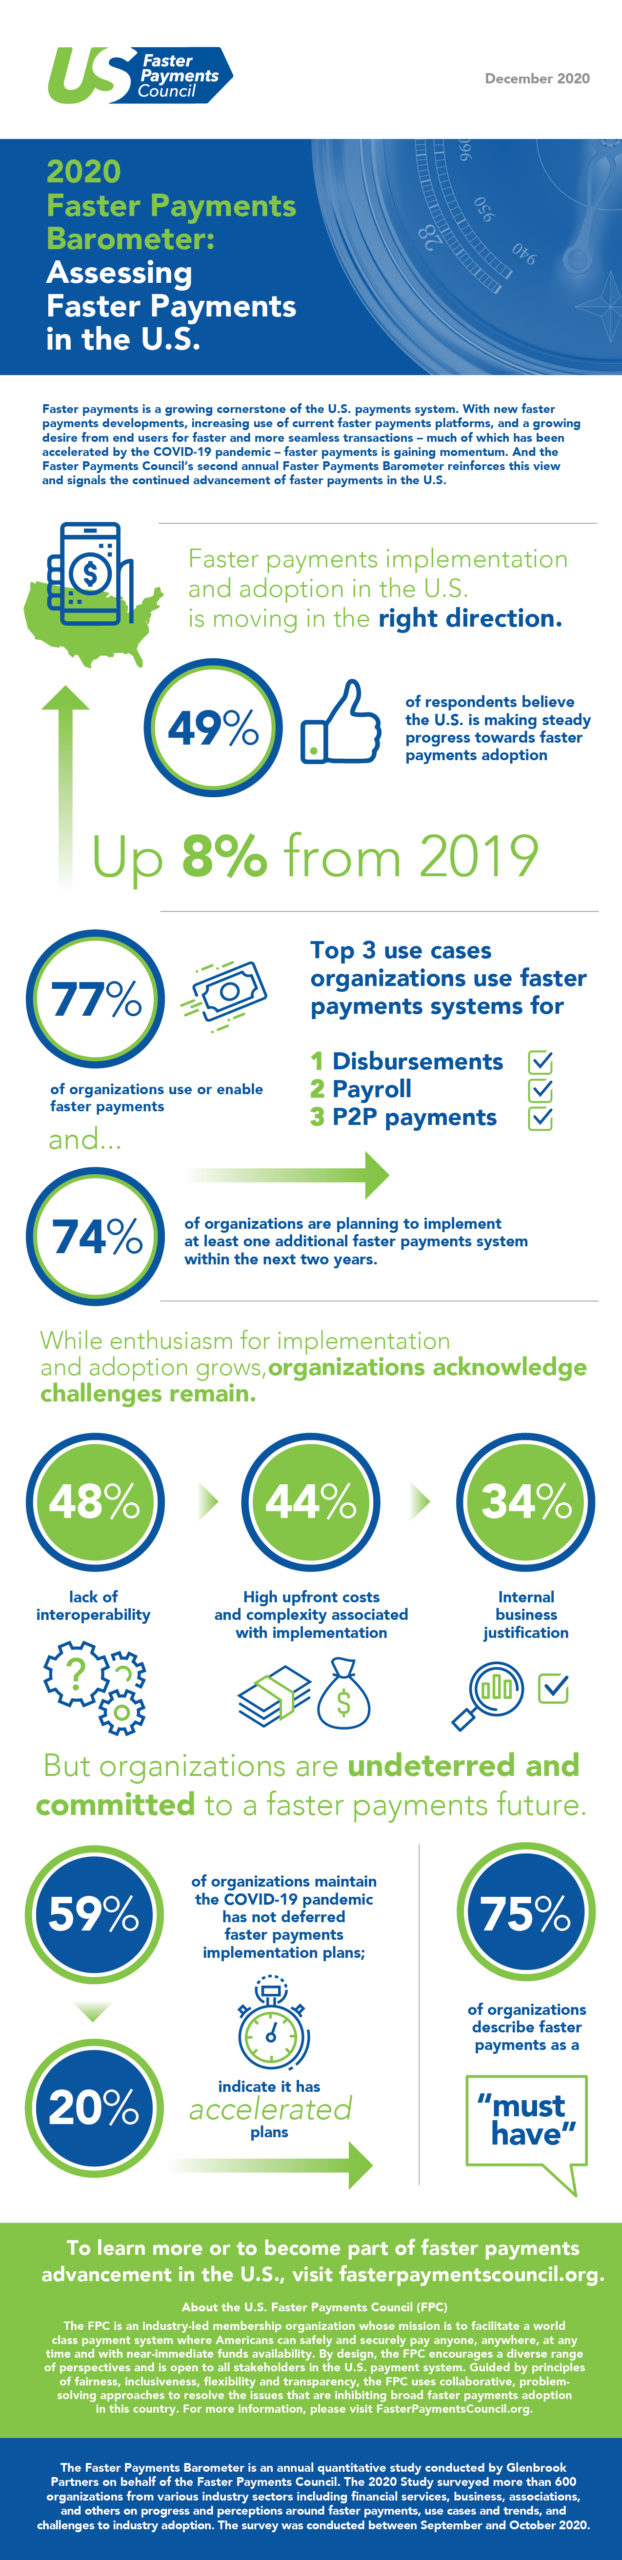 Faster Payments Council 2020 Survey Infographic